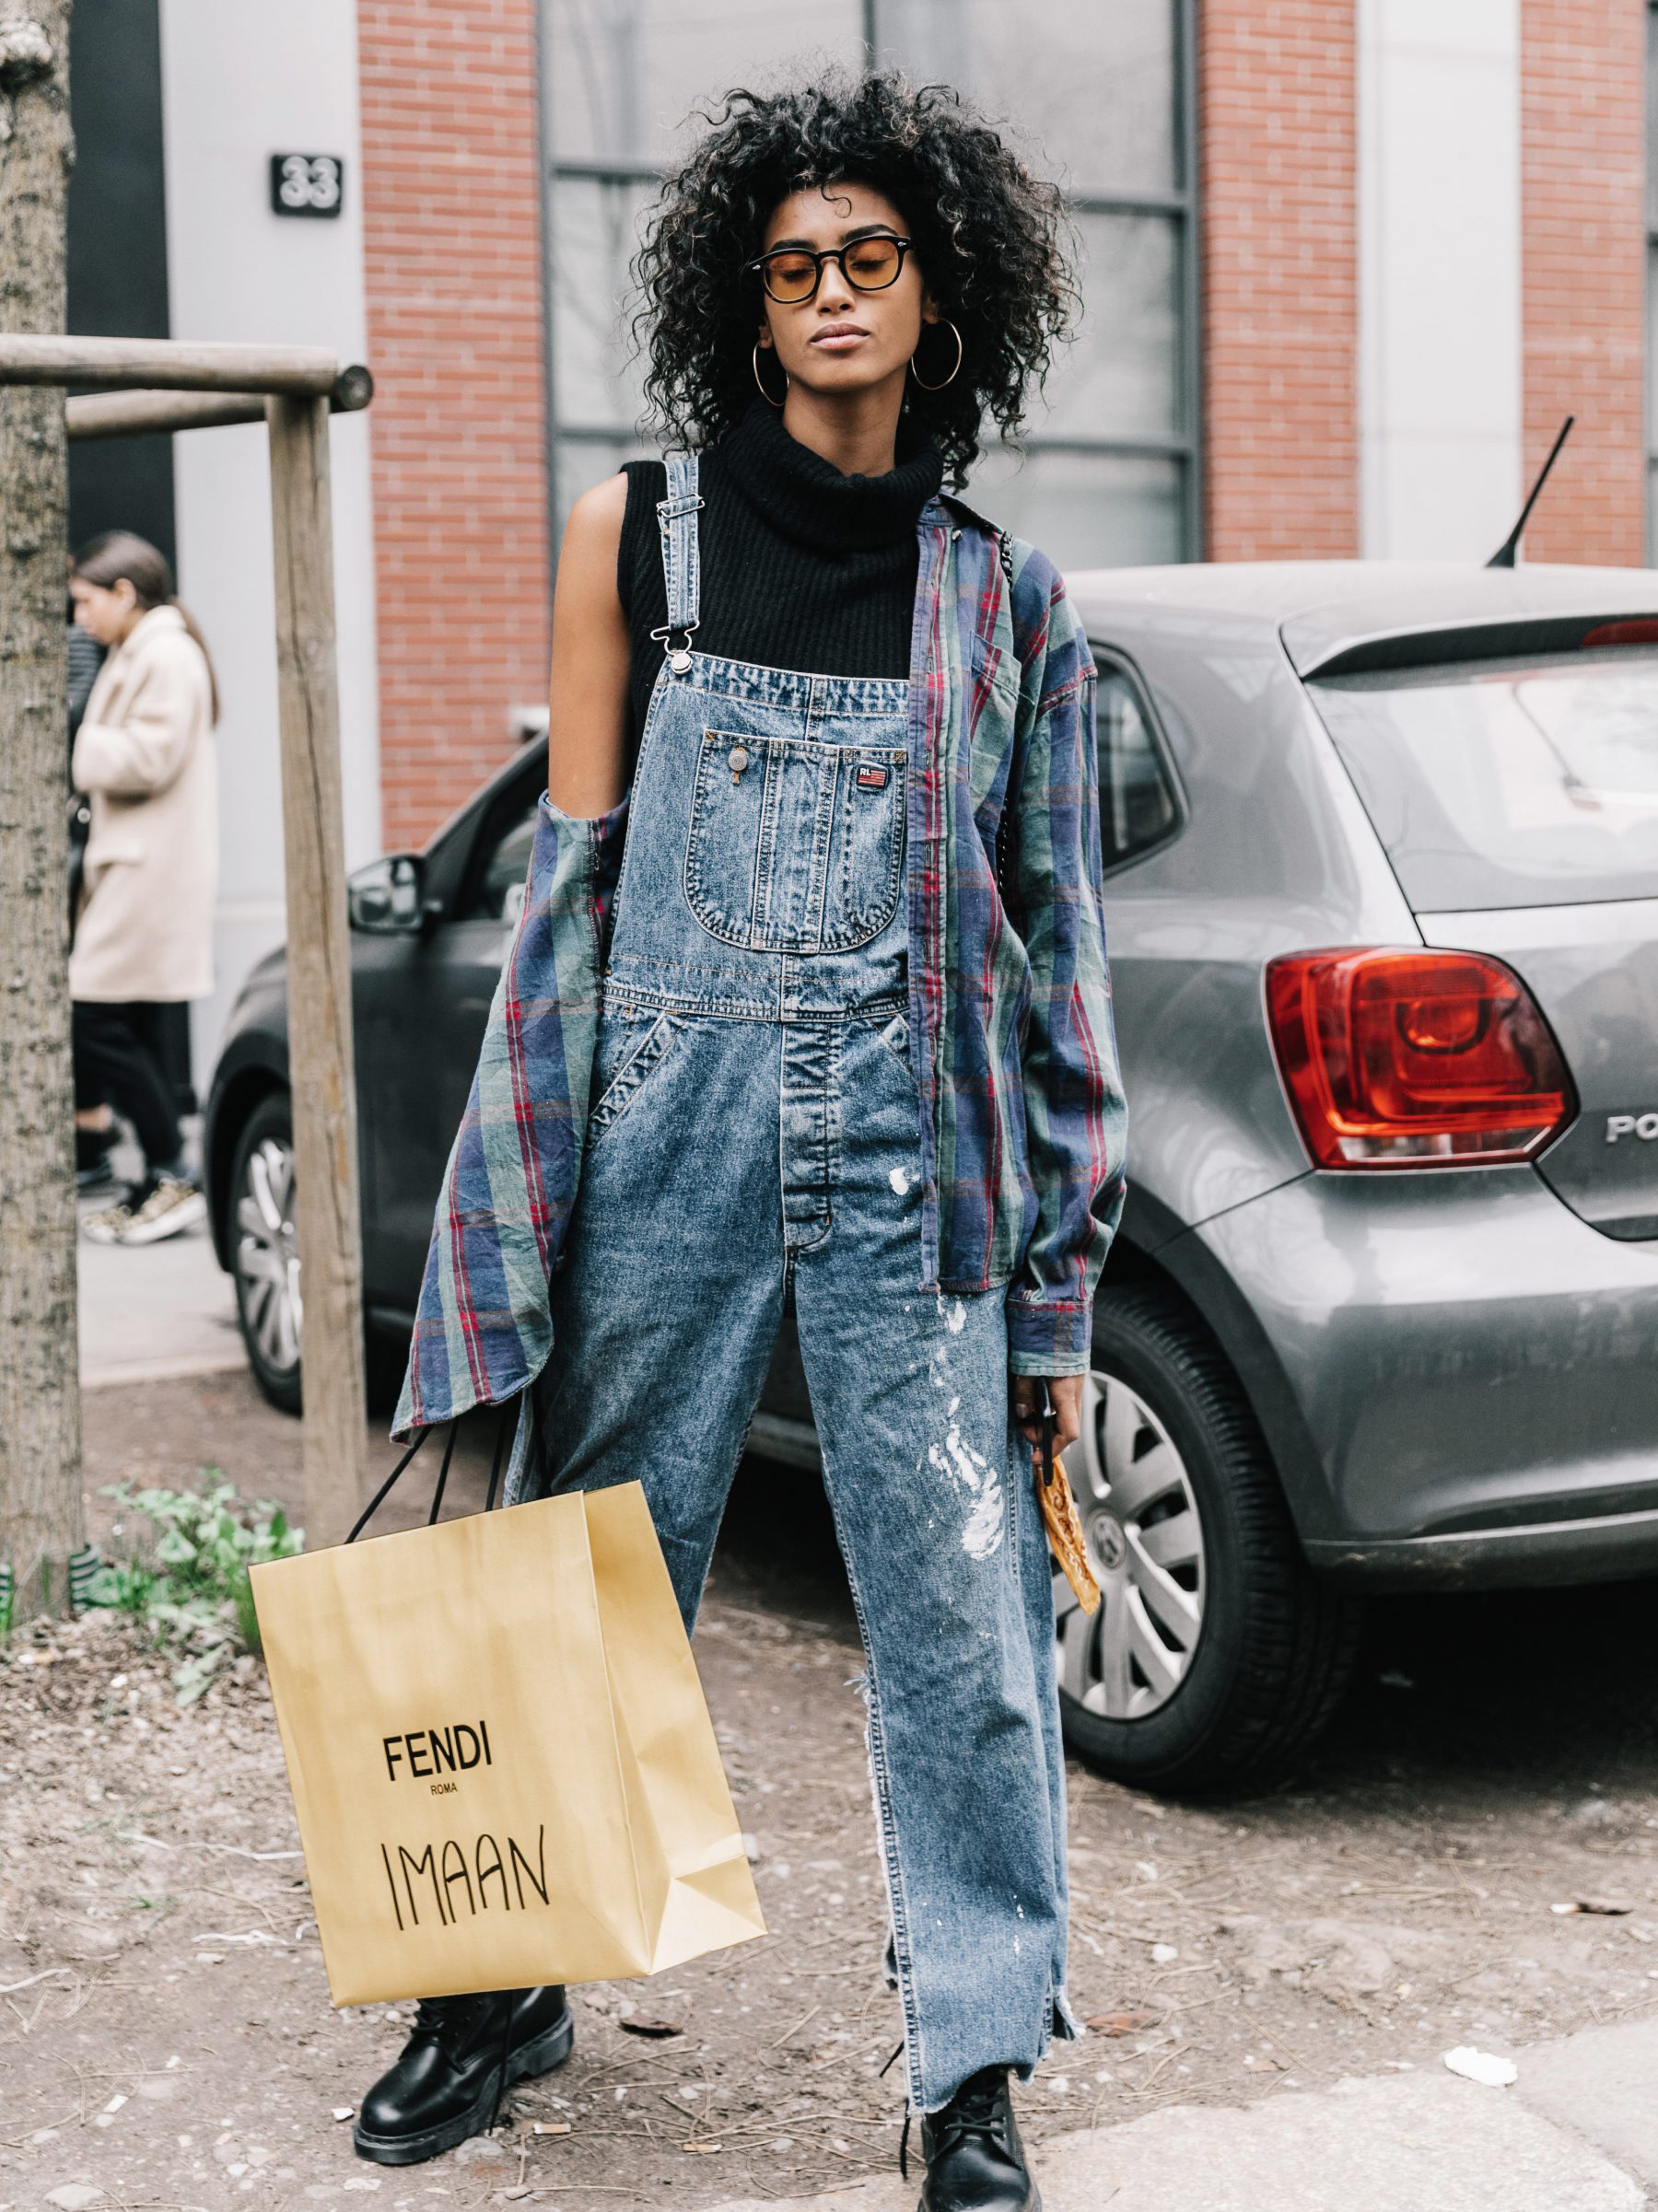 15 Overall Outfits to Try in 2020 | Who 